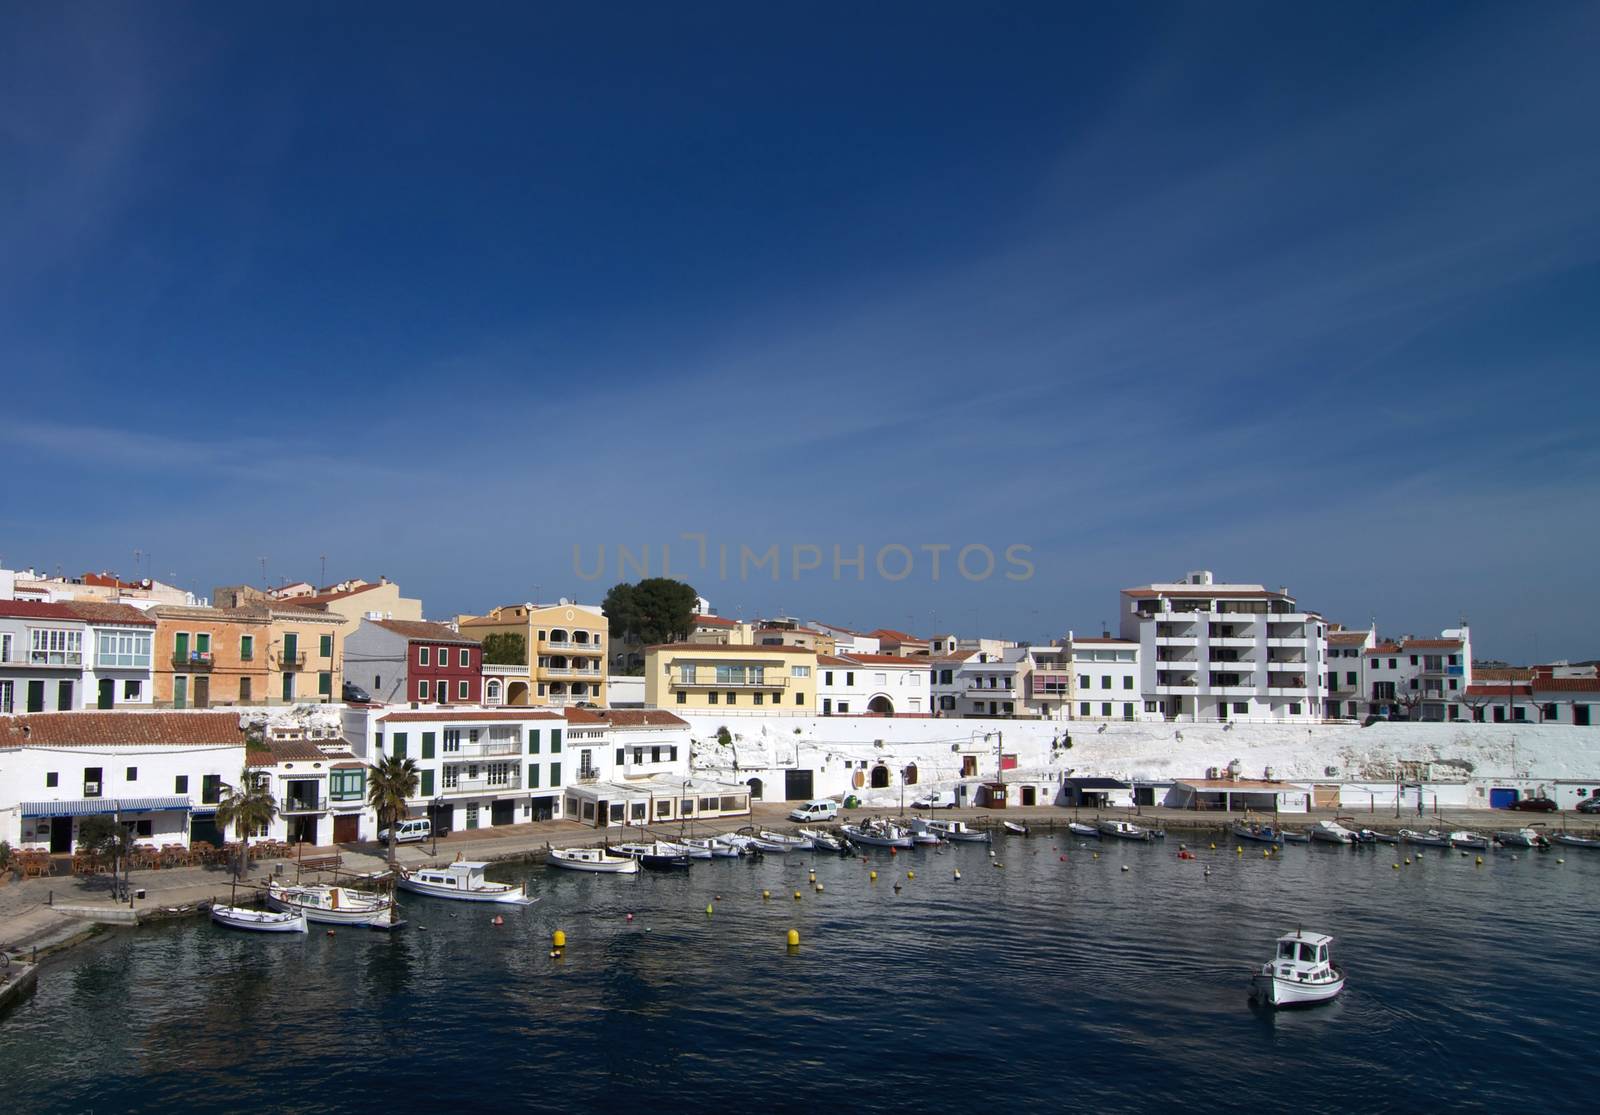 Es Castell Harbor and Small Boat in Lagoon on Blue Skies background, Menorca, Balearic Islands